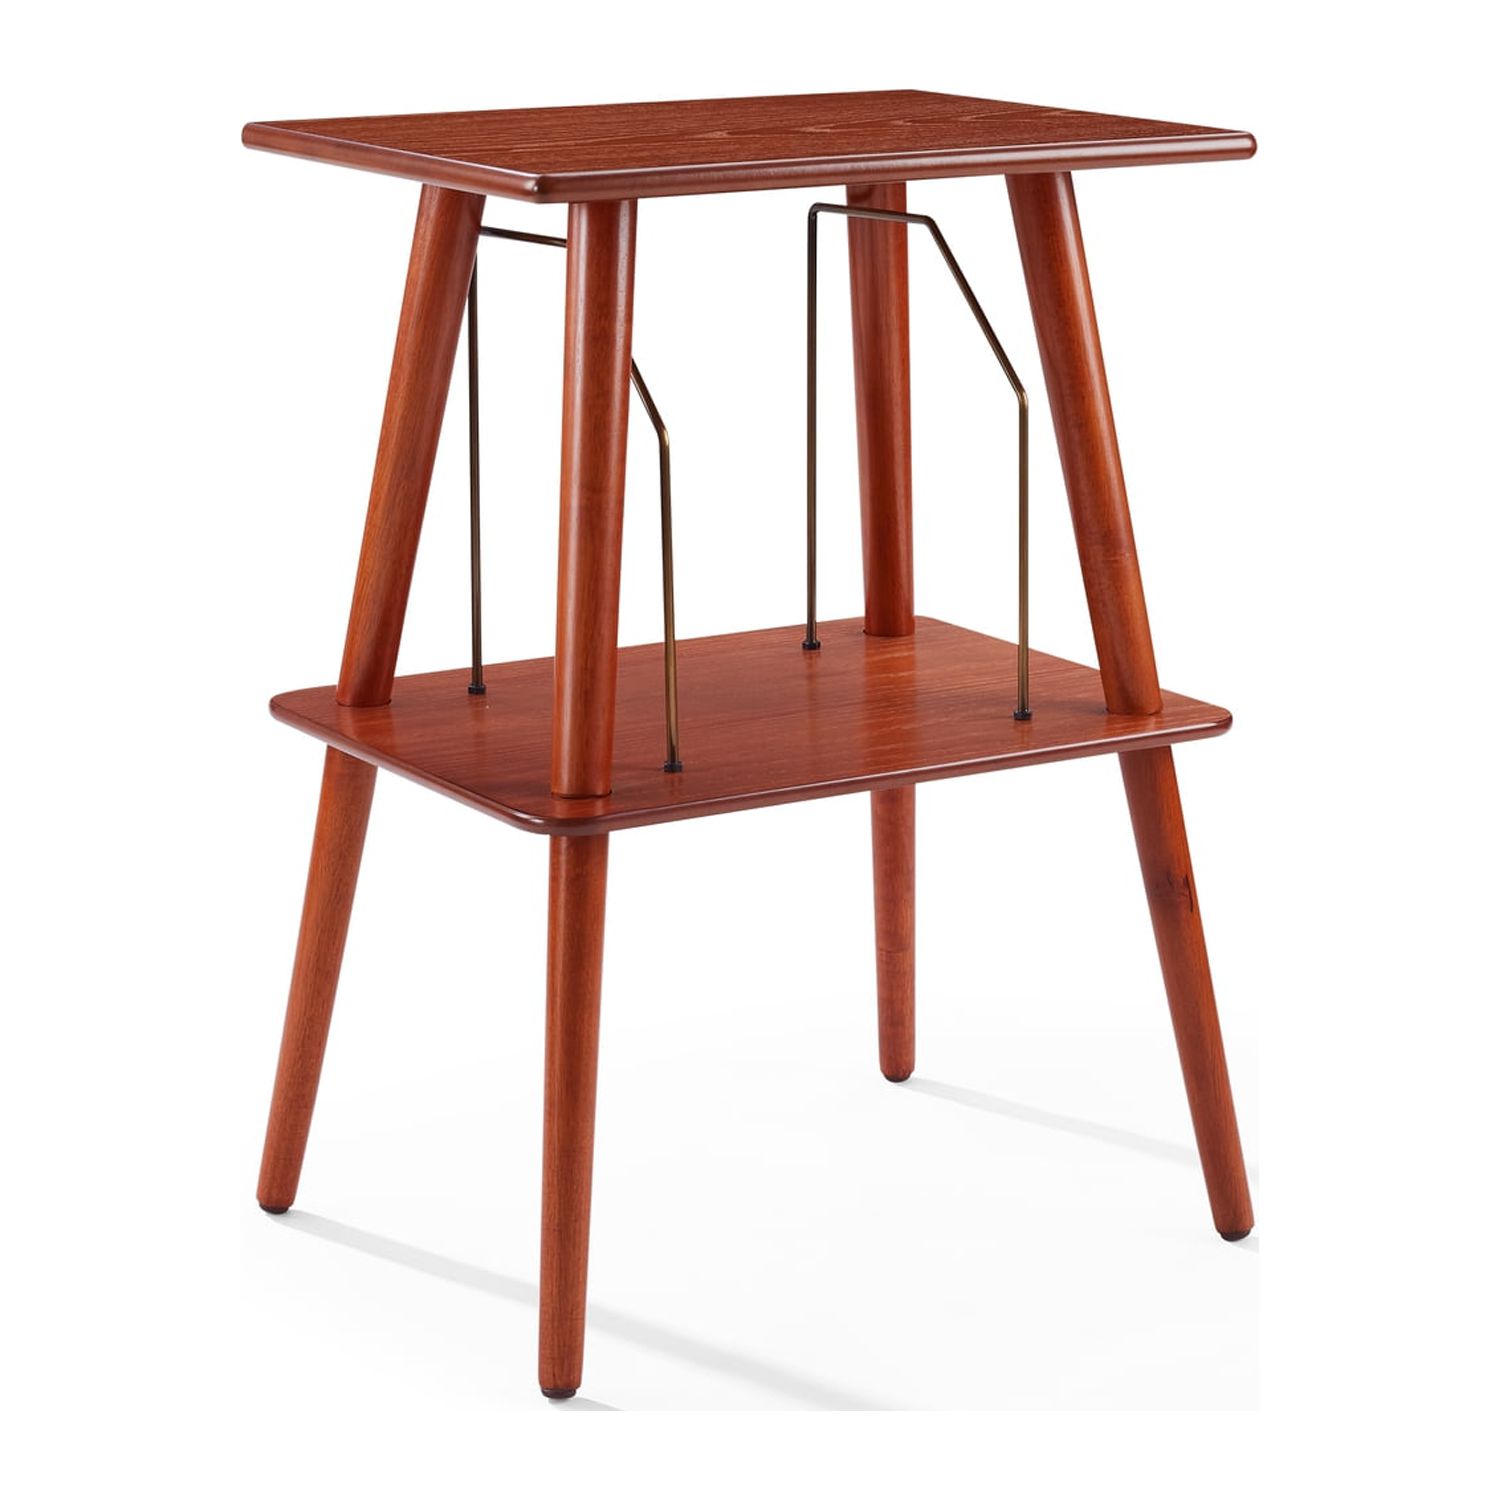 Crosley Furniture Manchester Mid-Century Wood Metal Turntable Stand in Paprika - image 2 of 5